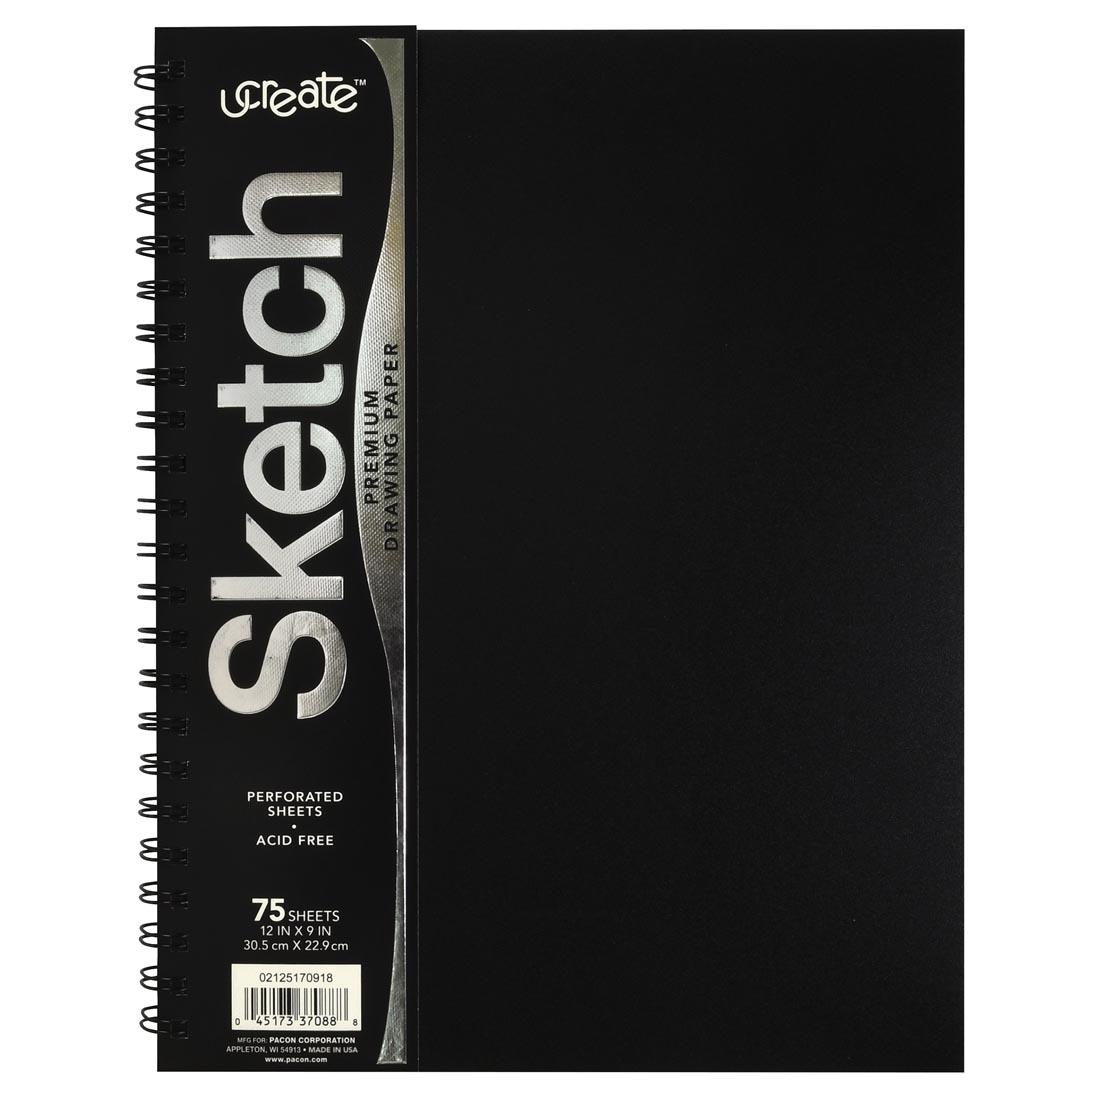 UCreate Poly Cover Sketch Book